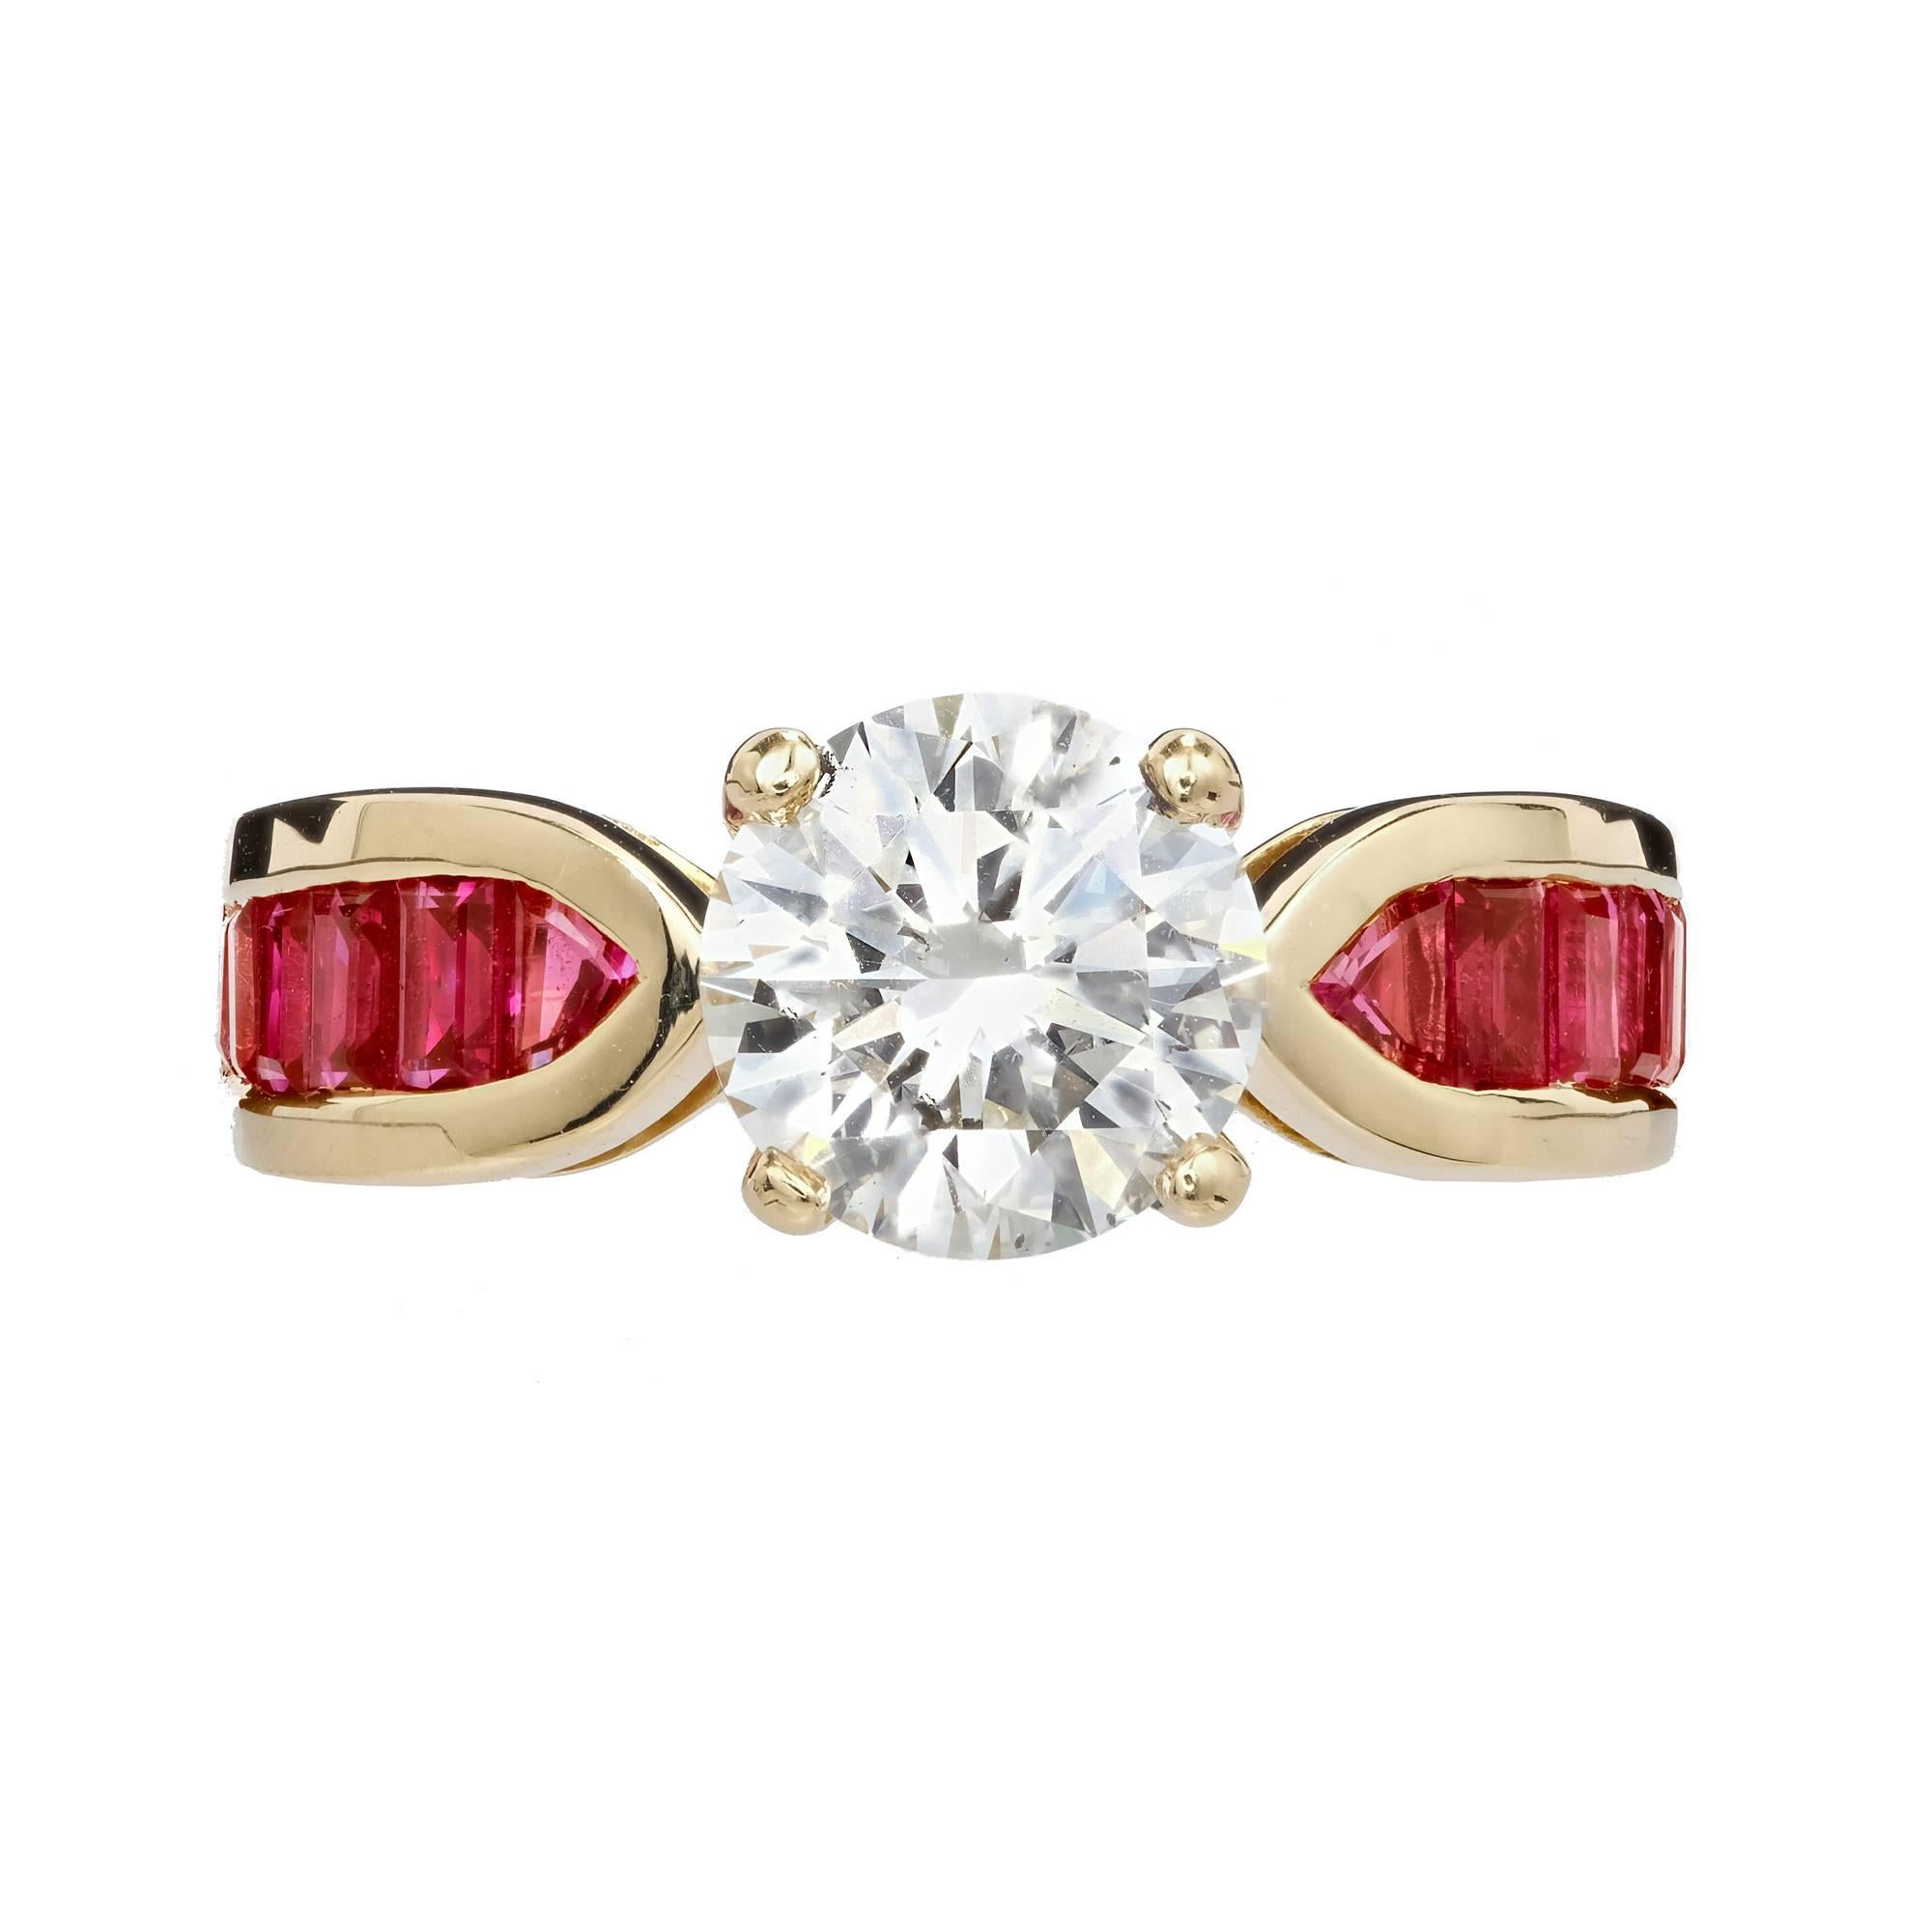 Peter Suchy 18k yellow gold channel set natural no heat Ruby and diamond engagement ring. Center diamond is GIA certified 1.59ct, L color, SI1 clarity and medium blue florescence. The Diamond faces up white because of the excellent cutting and